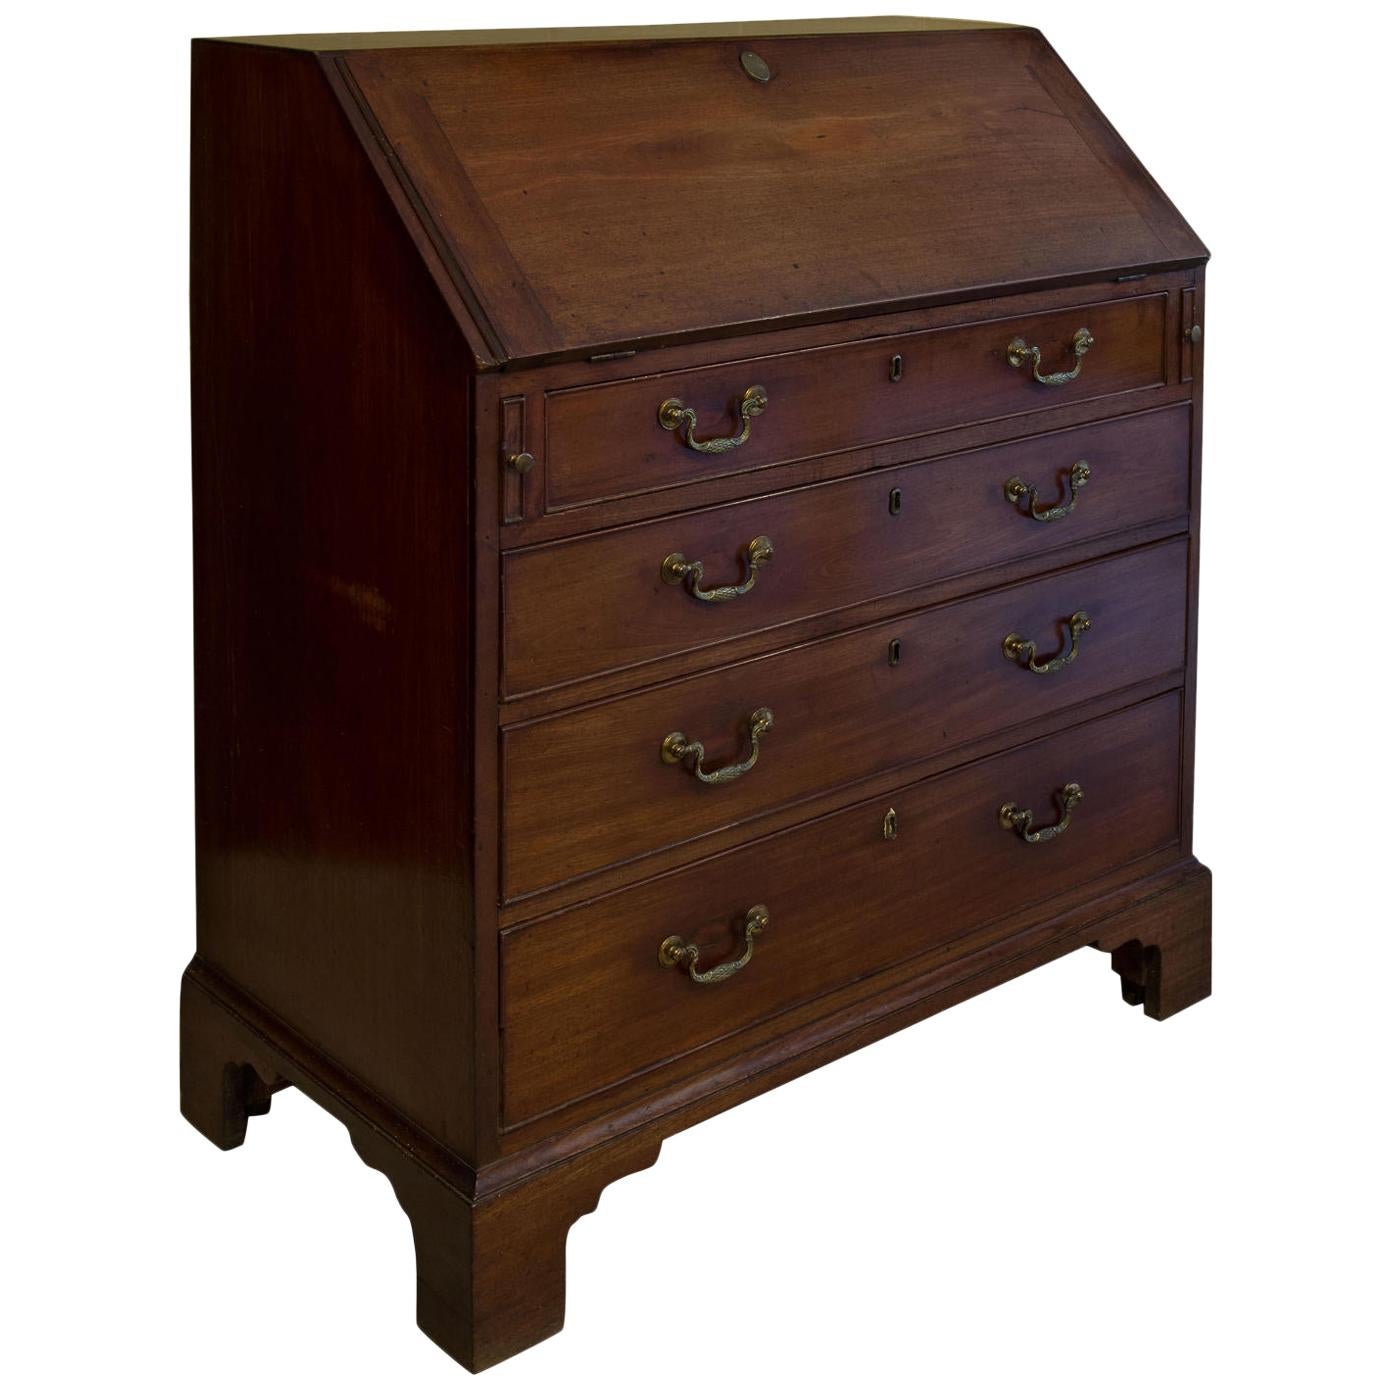 George III Mahogany 4-Drawer Bureau, Swan Neck Drop Handles Well Fitted Interior For Sale